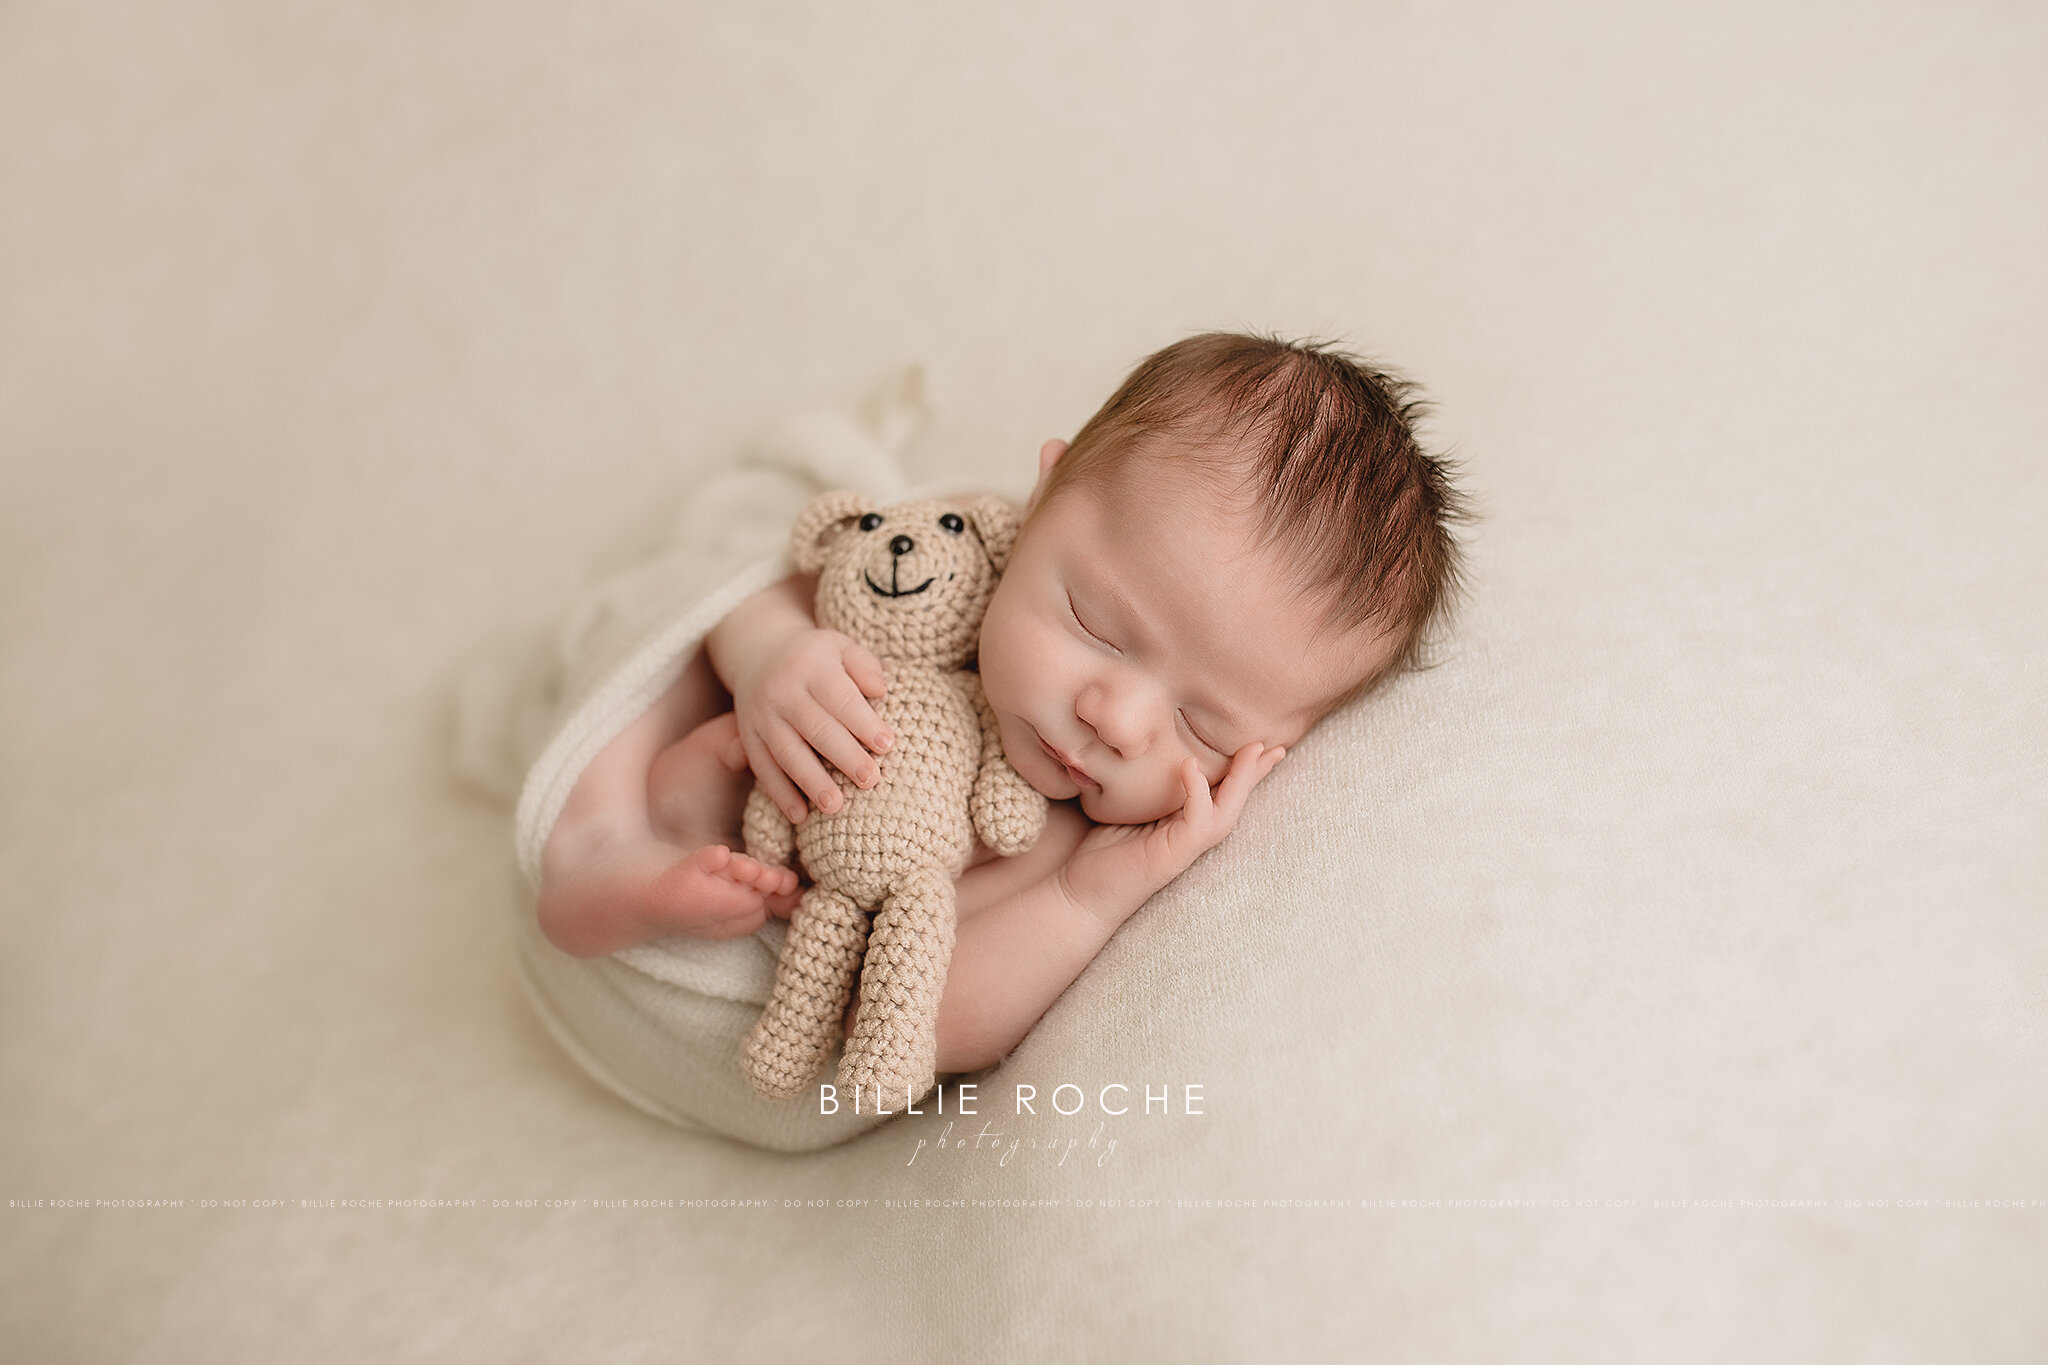  Billie Roche Photography  is an award winning photographer specializing in newborn, maternity, baby and family photography in Houston, Texas. Serving surrounding areas like Fulshear, Katy, Richmond, Sugar Land, Missouri, Rosenberg, Cypress, Spring,R